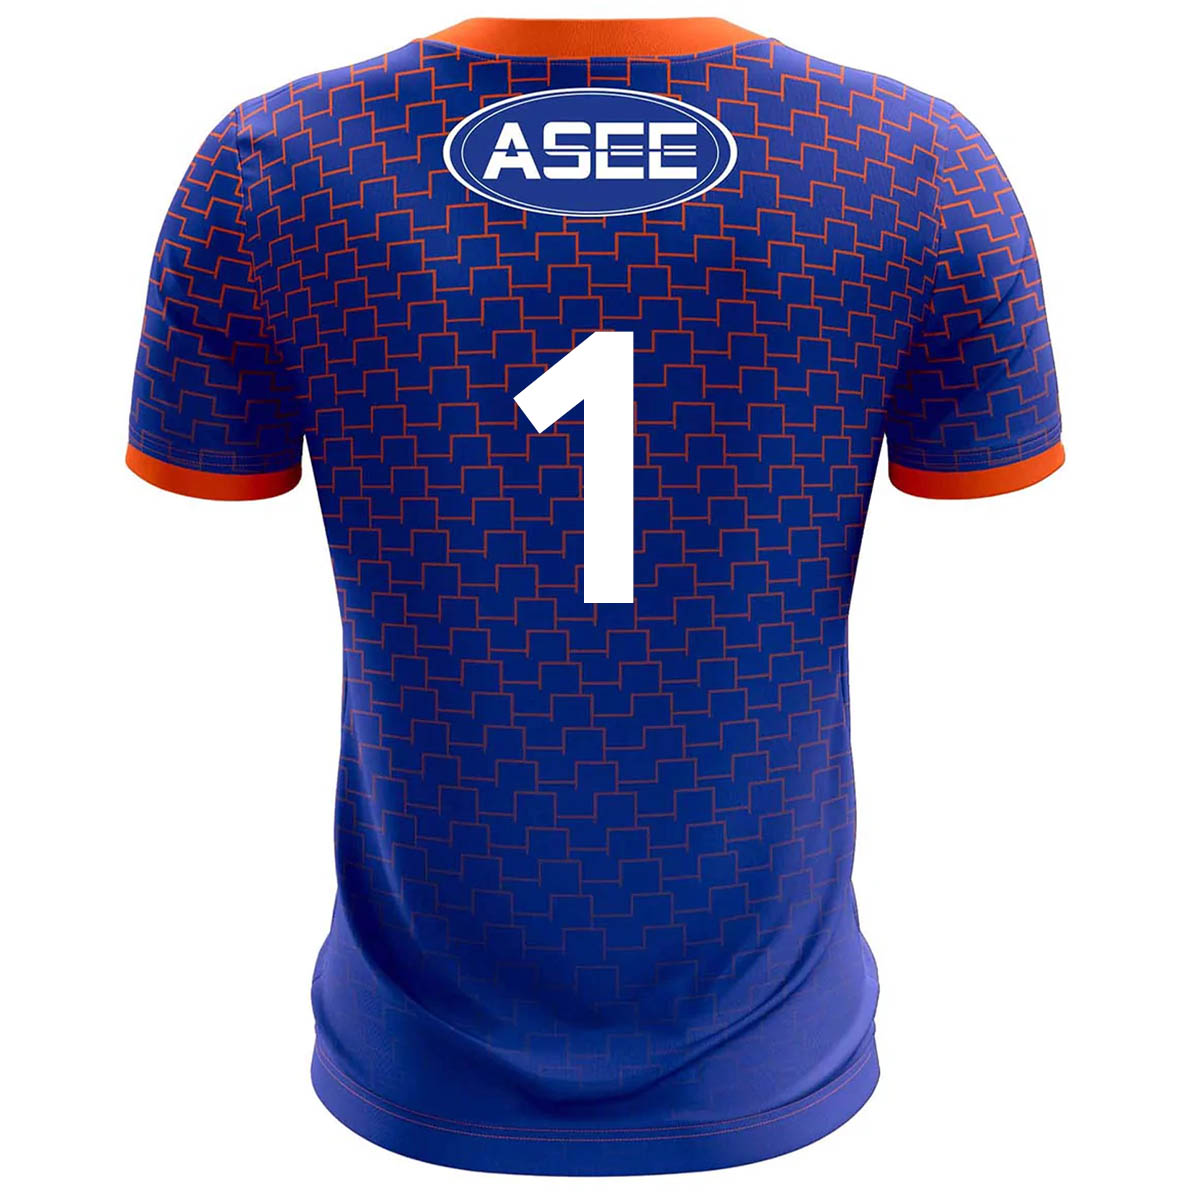 Mc Keever Armagh GAA Official Numbered Goalkeeper Jersey - Adult - Blue/Orange